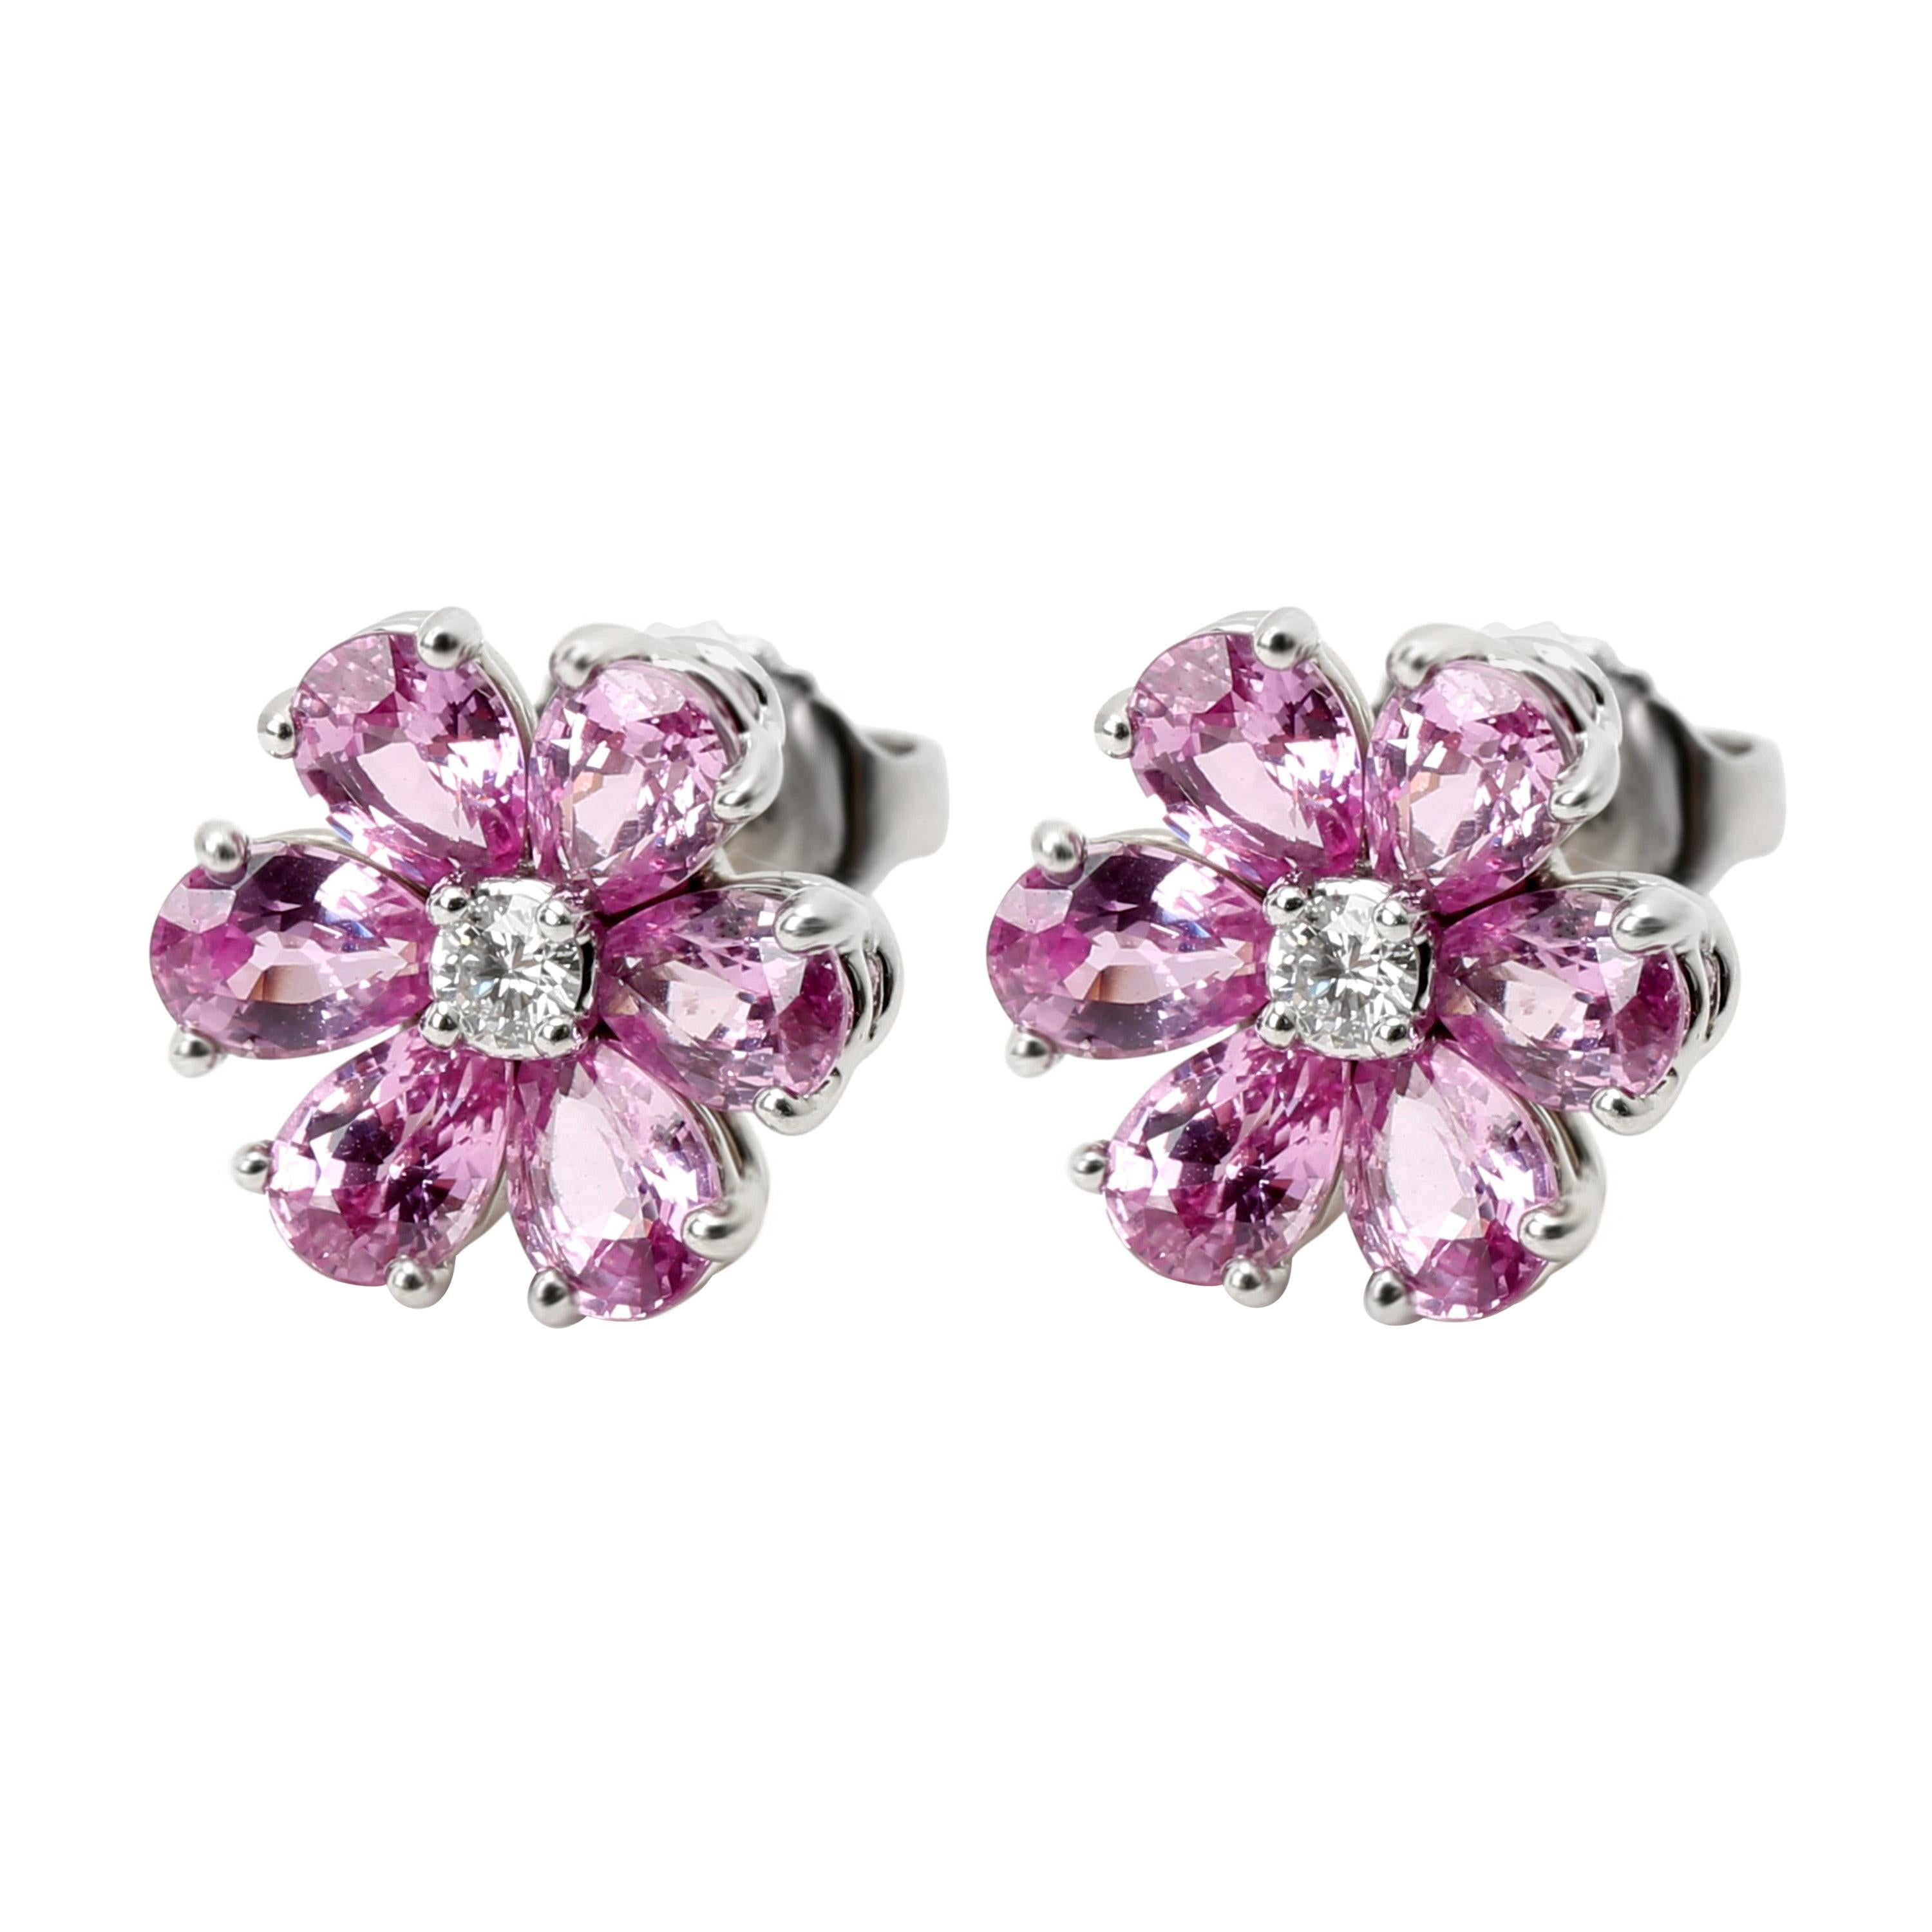 Harry Winston Forget-Me-Not Diamond and Pink Sapphire Earrings in Platinum